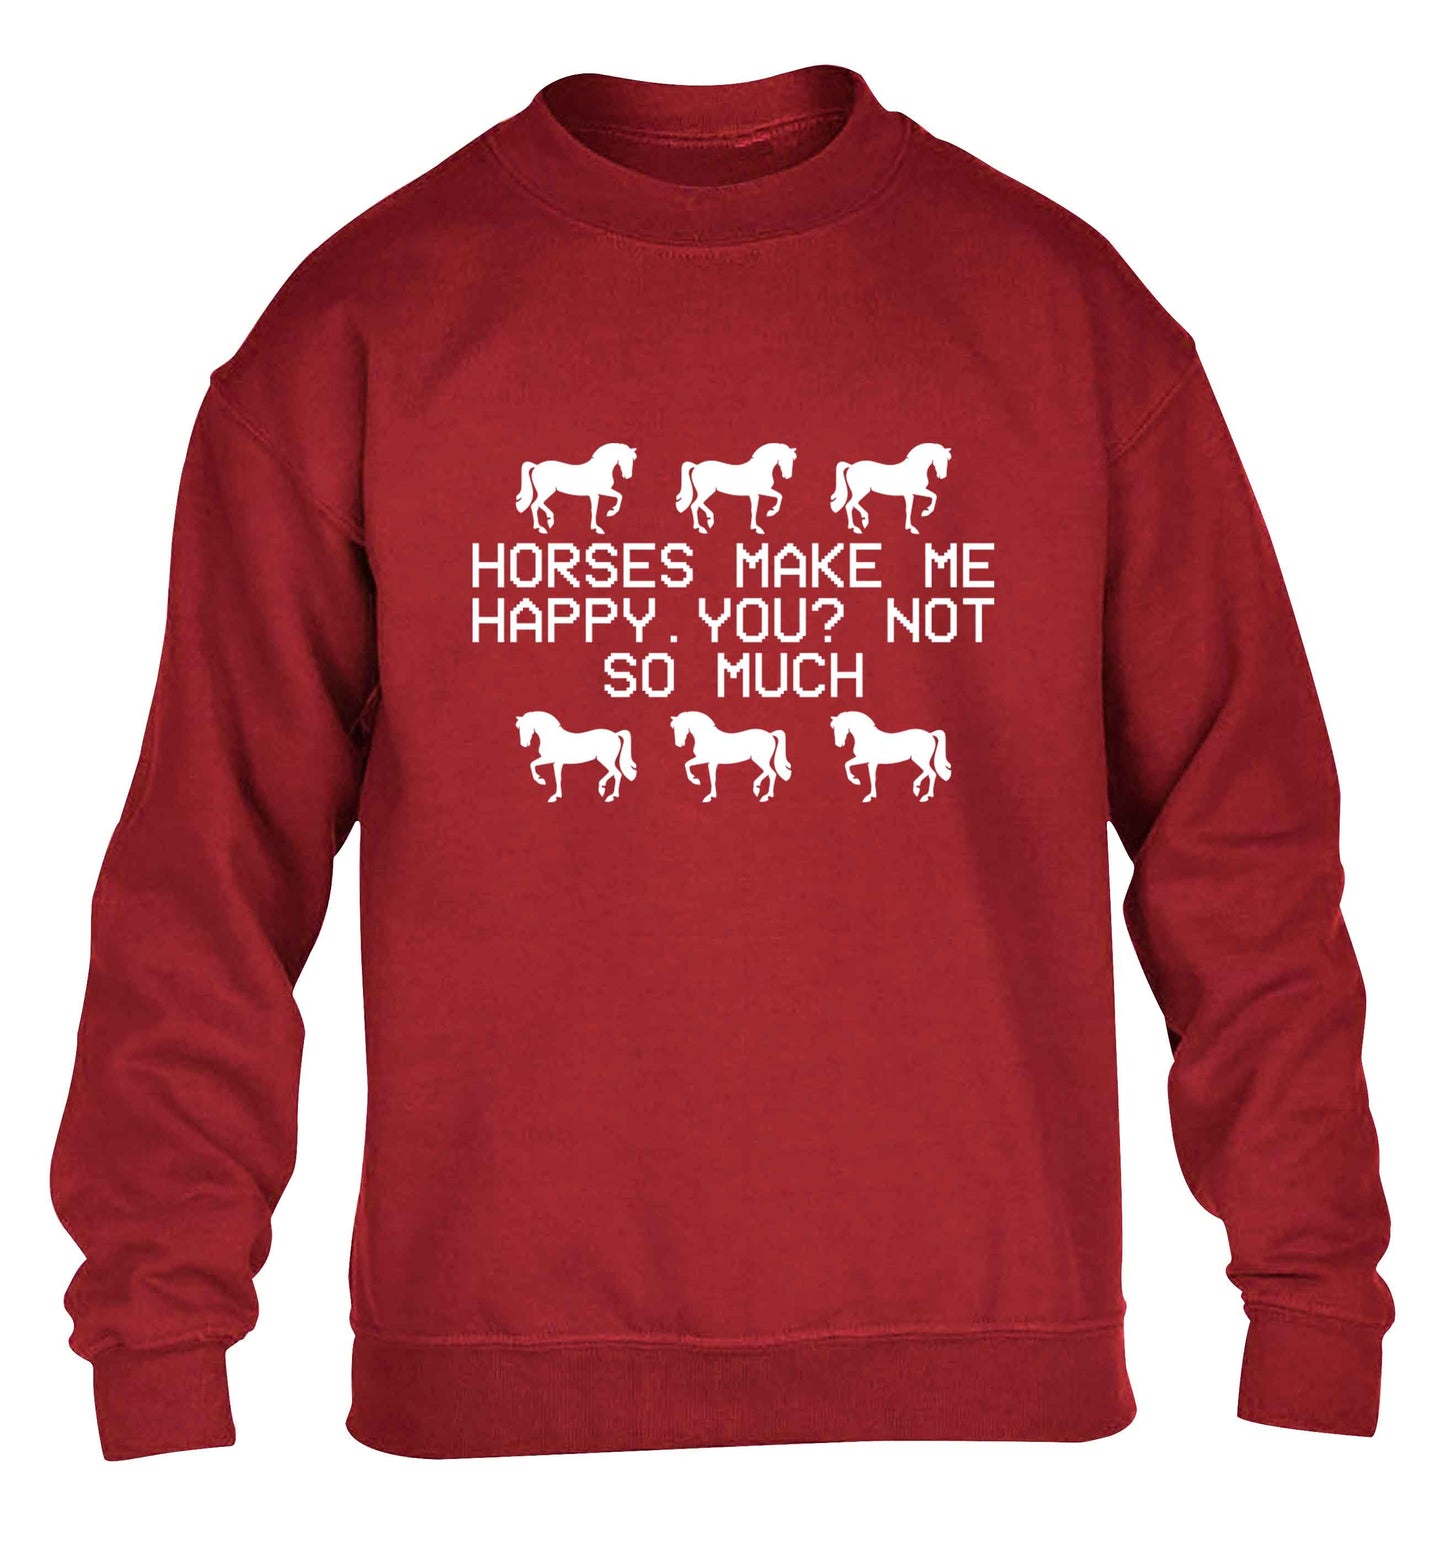 Horses make me happy, you not so much children's grey sweater 12-13 Years